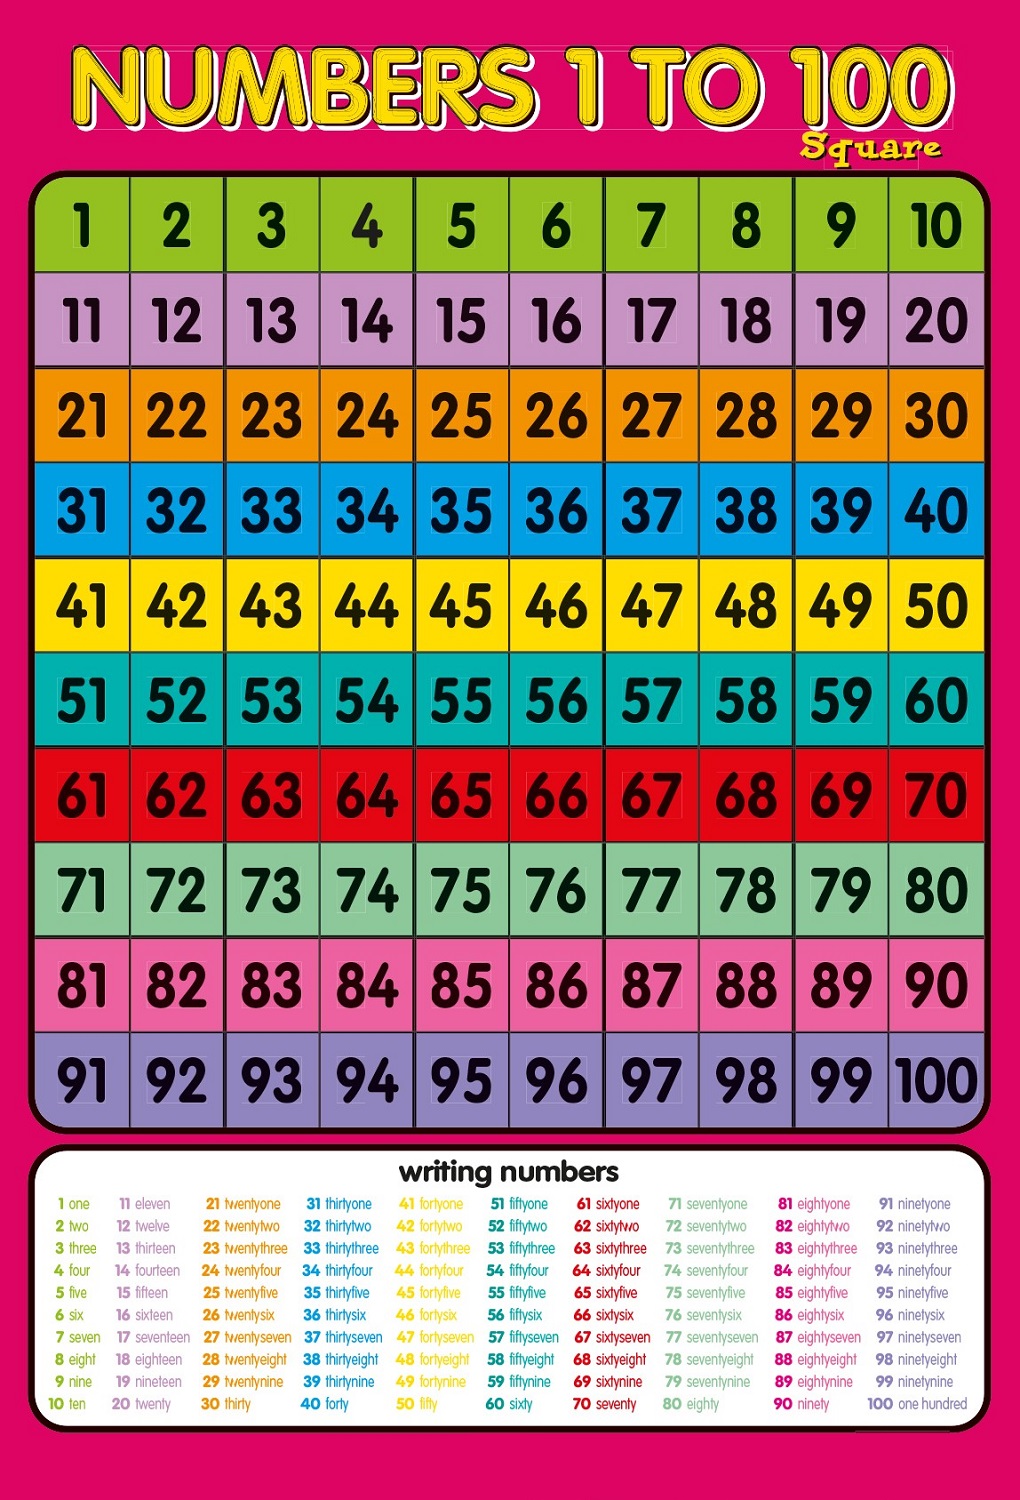 printable-number-chart-1-100-activity-shelter-printable-morse-code